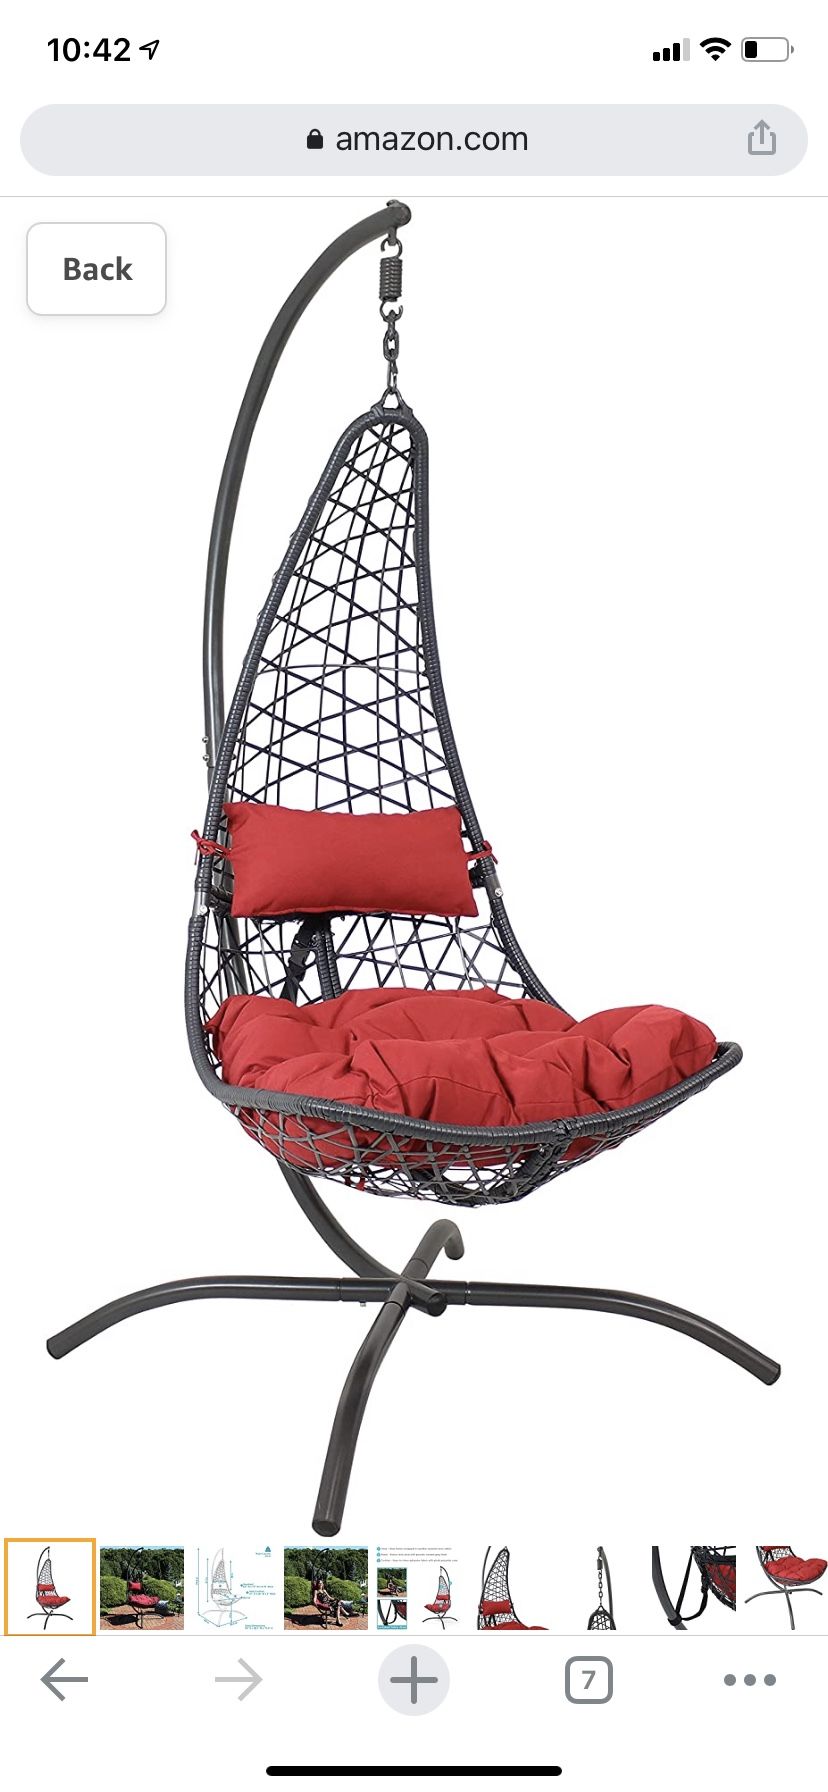 Sunnydaze Phoebe Hanging Lounge Chair with Stand and Seat Cushions - Resin Wicker Outdoor Basket Swing Chair with Steel Frame for Patio, Porch, Balcon